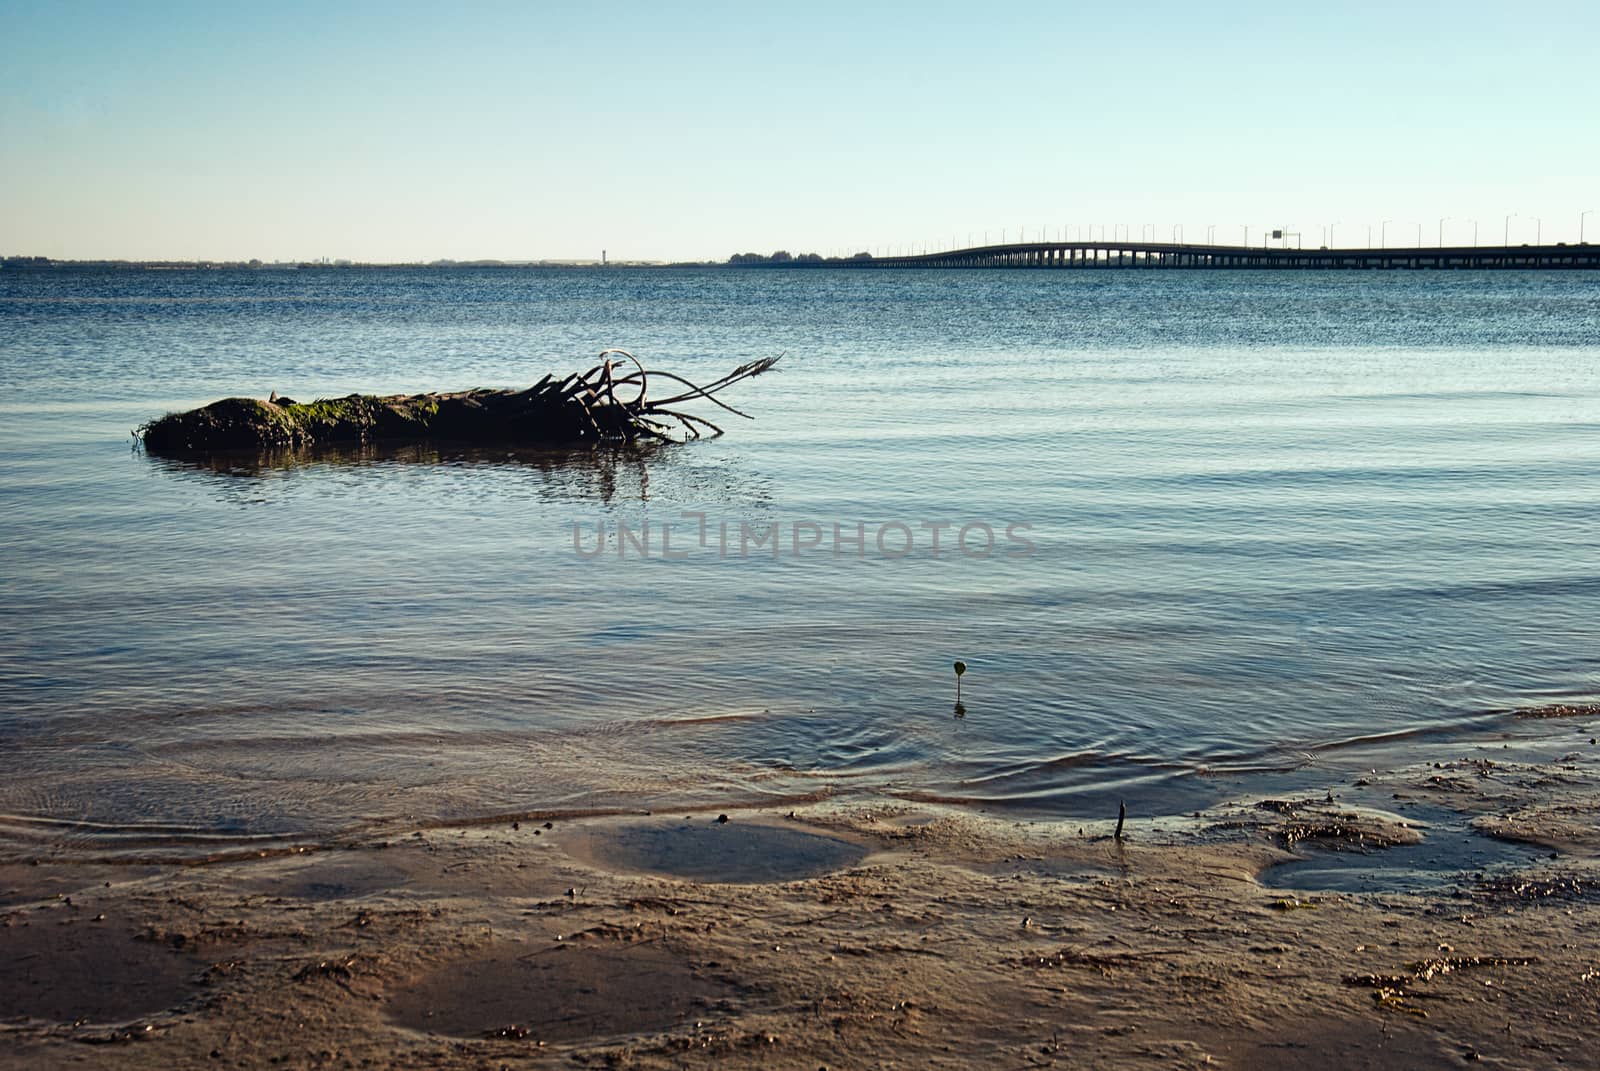 Bridge in the distance, Tampa Bay shoreline with floating palm tree stump, Tampa Bay, Florida